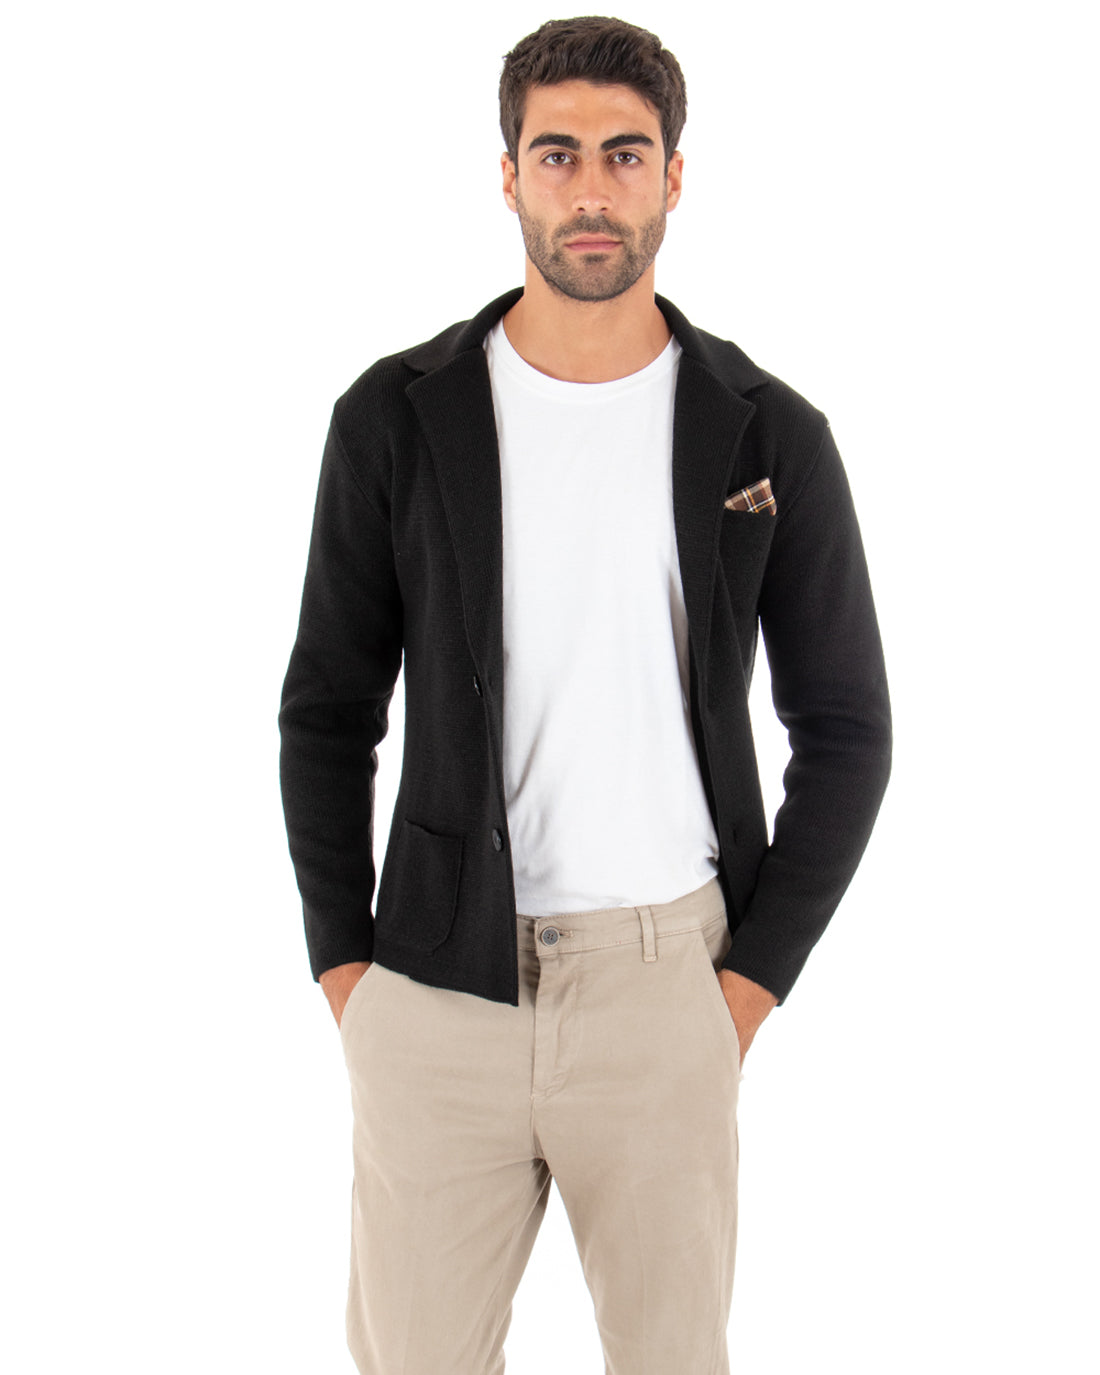 Men's Cardigan Jacket With Buttons Knit Sweater Solid Color Casual Black GIOSAL-M2663A